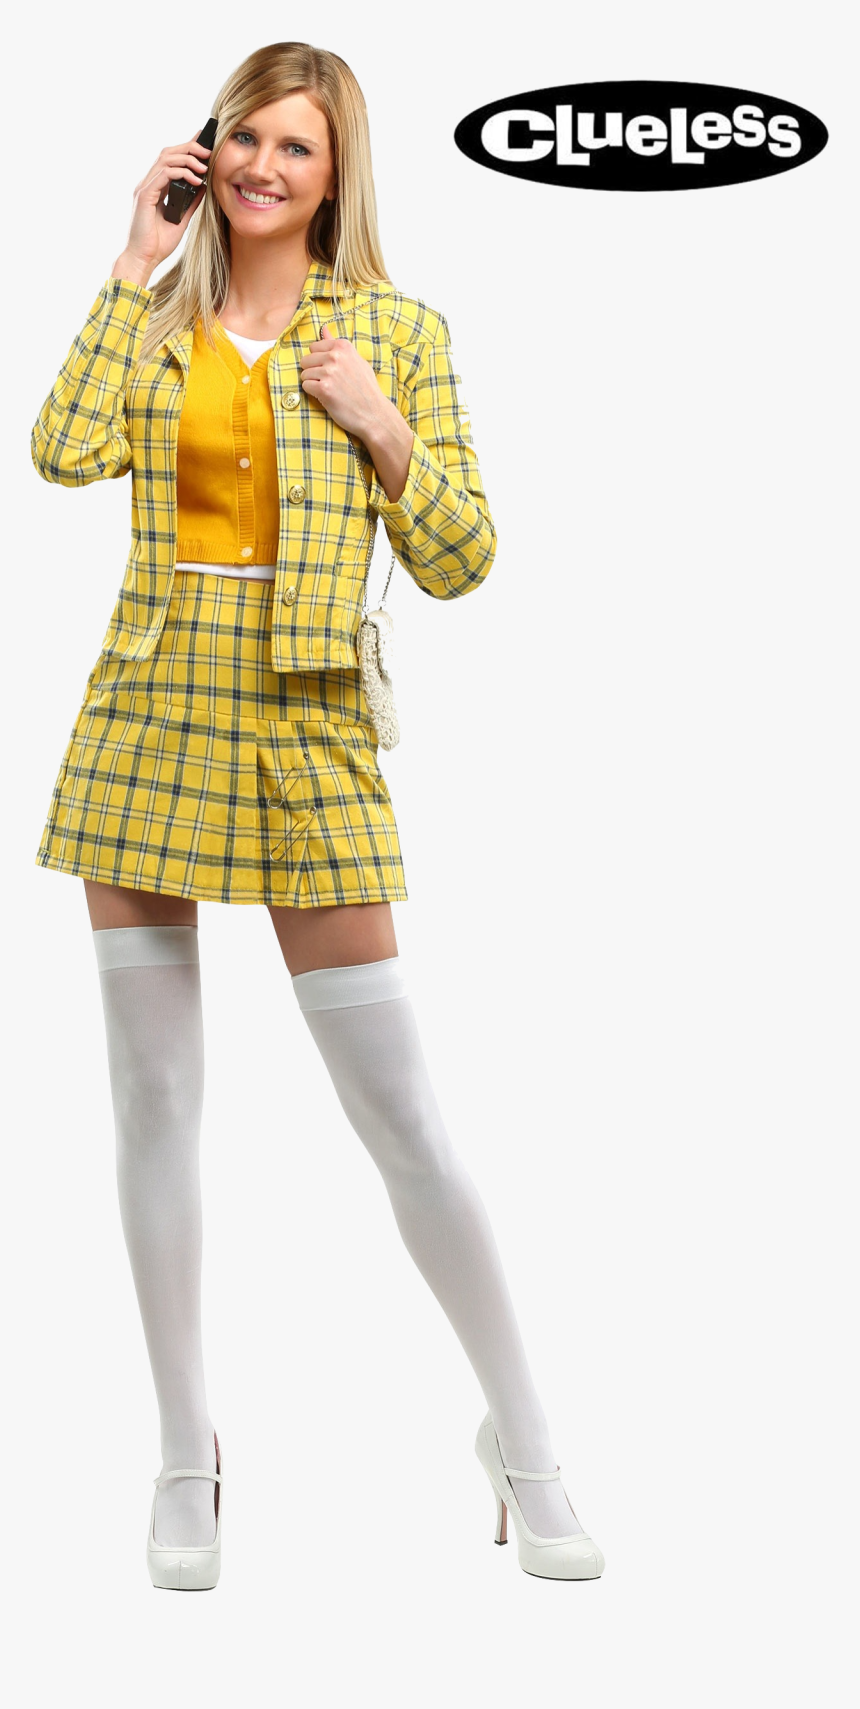 Clueless Cher Plus Size Womens Costume - Women Halloween Costumes, HD Png Download, Free Download